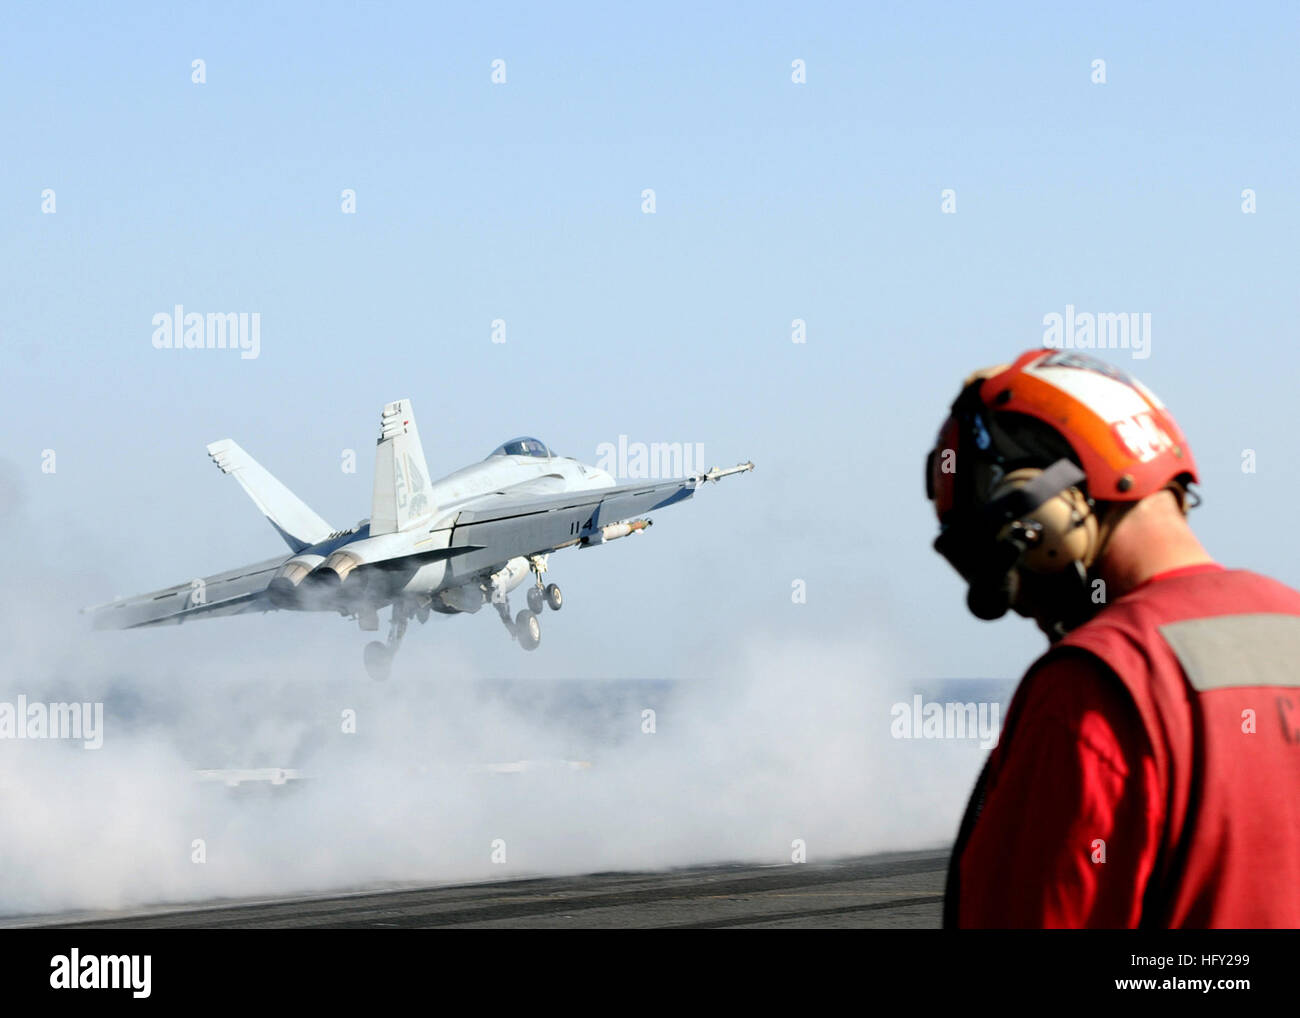 100216-N-4236E-211 GULF OF OMAN (Feb. 16, 2010) An F/A-18E Super Hornet from the Pukin Dogs of Strike Fighter Squadron (VFA) 143 launches from the flight deck of the Nimitz-class aircraft carrier USS Dwight D. Eisenhower (CVN 69). VFA-143 is embarked aboard Dwight D. Eisenhower for a six-month deployment as a part of the on-going rotation of forward-deployed forces to support maritime security operations. (U.S. Navy photo by Mass Communication Specialist 3rd Class Chad R. Erdmann/Released) US Navy 100216-N-4236E-211 An F-A-18E Super Hornet launches from USS Dwight D. Eisenhower (CVN 69) Stock Photo